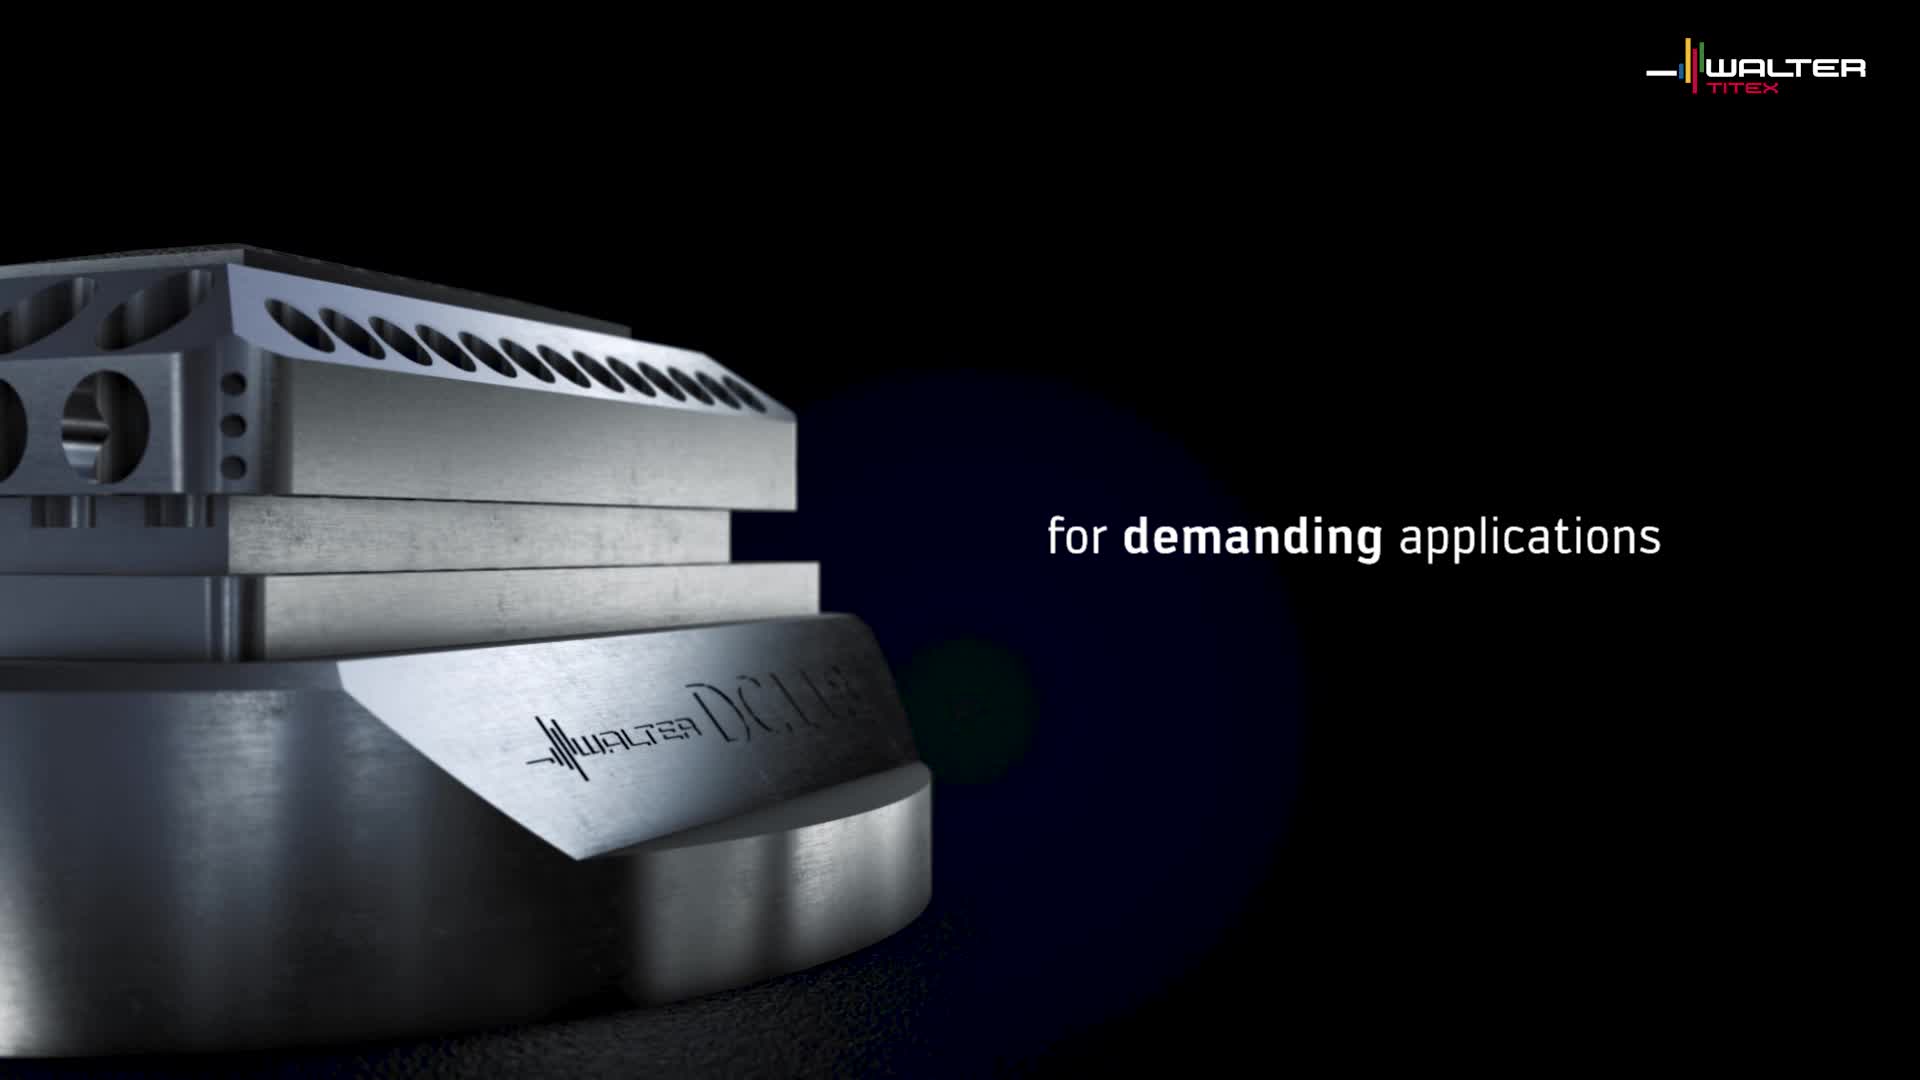 DC118 SUPREME SOLID CARBIDE DRILL - The new performance class for demanding applications